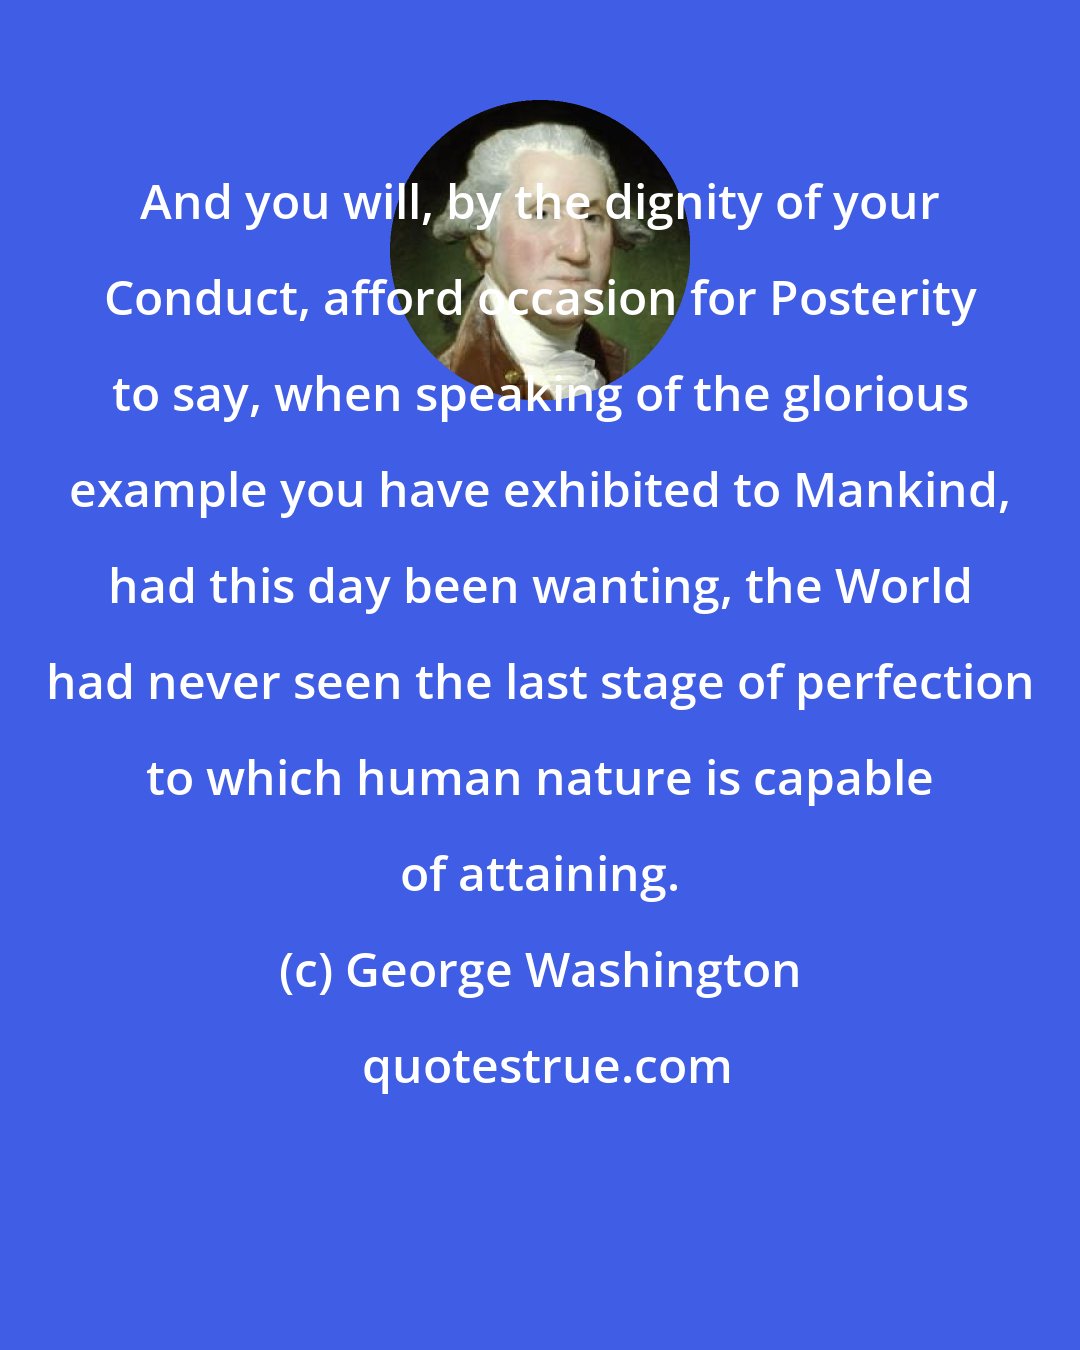 George Washington: And you will, by the dignity of your Conduct, afford occasion for Posterity to say, when speaking of the glorious example you have exhibited to Mankind, had this day been wanting, the World had never seen the last stage of perfection to which human nature is capable of attaining.